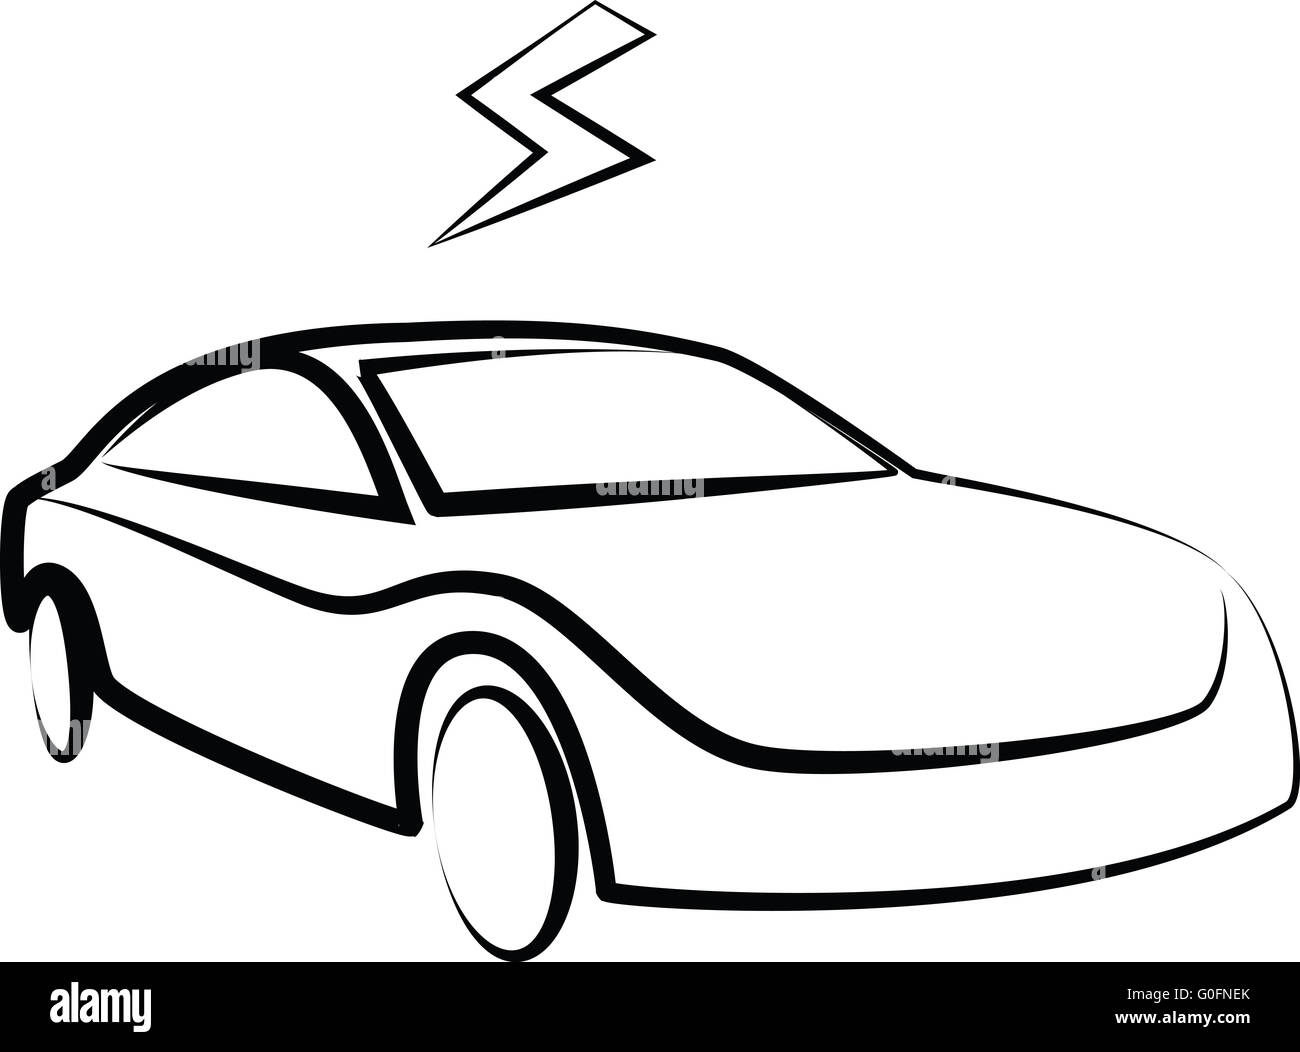 Hand Drawn Doodle Electric Car Charging Stock Vector (Royalty Free)  755704126 | Shutterstock | Doodles, How to draw hands, Cute doodles